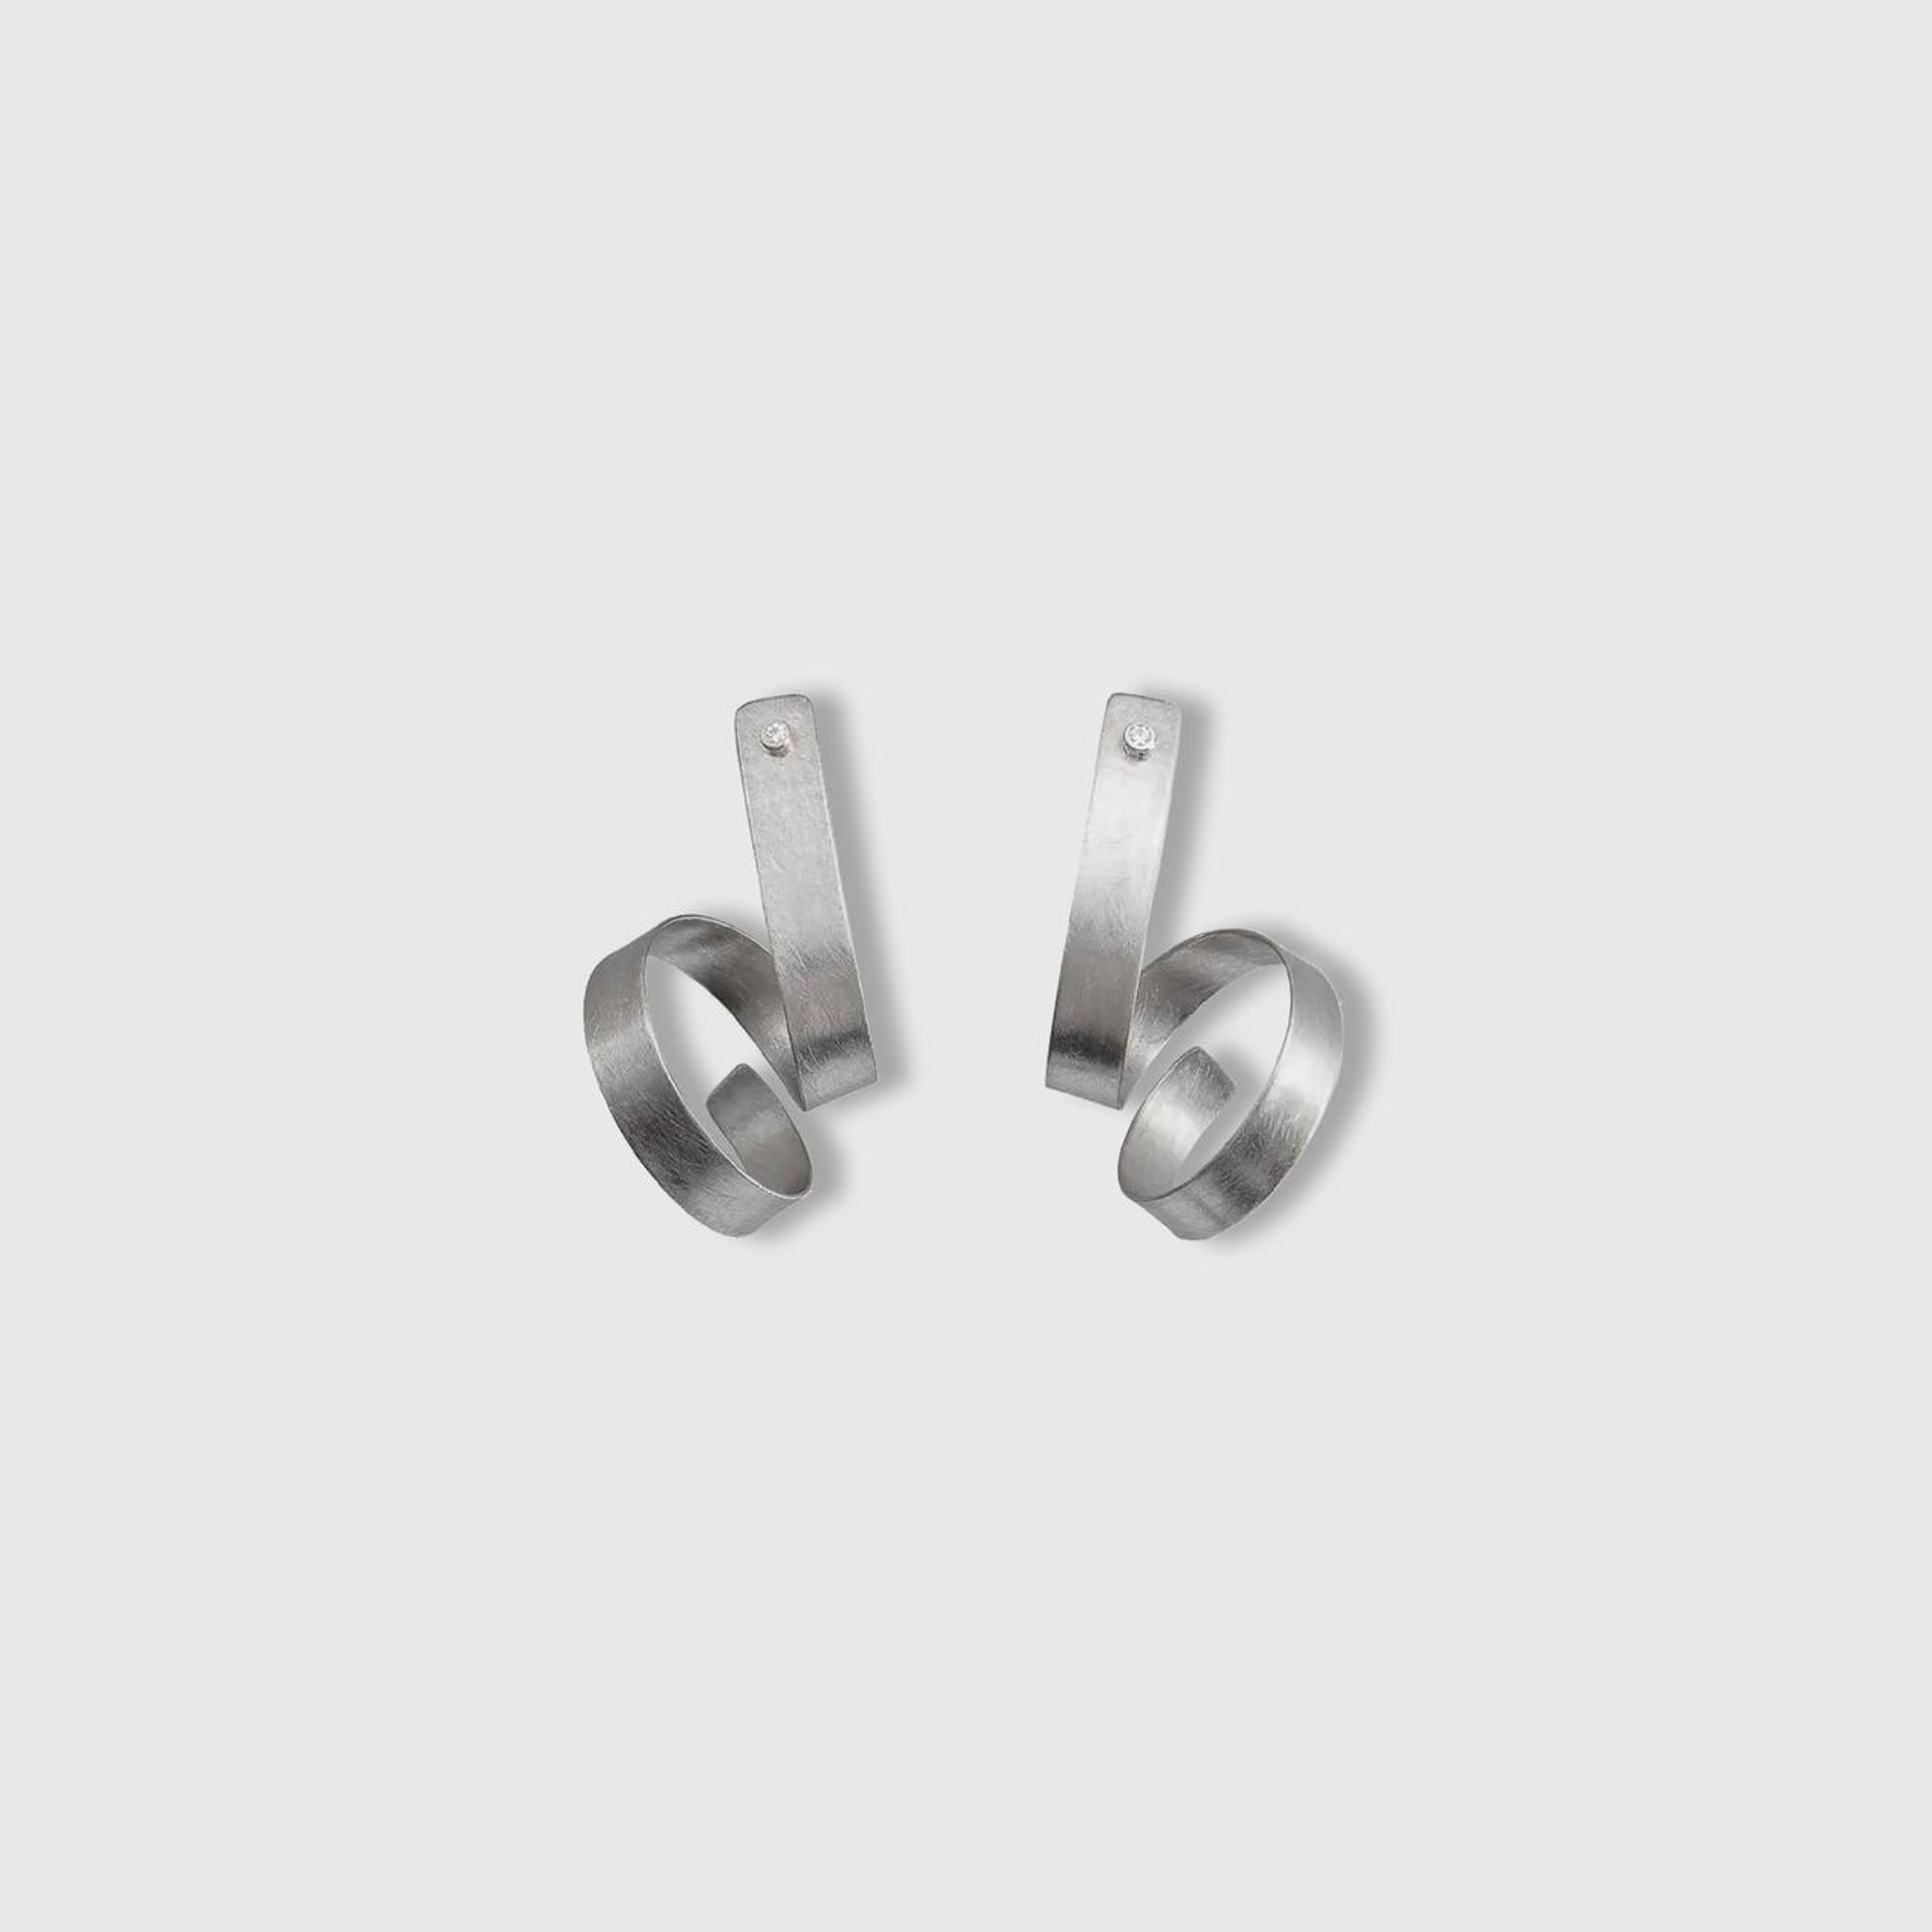 Mysterium Collection Curled Earrings, Stainless Steel with CZ 